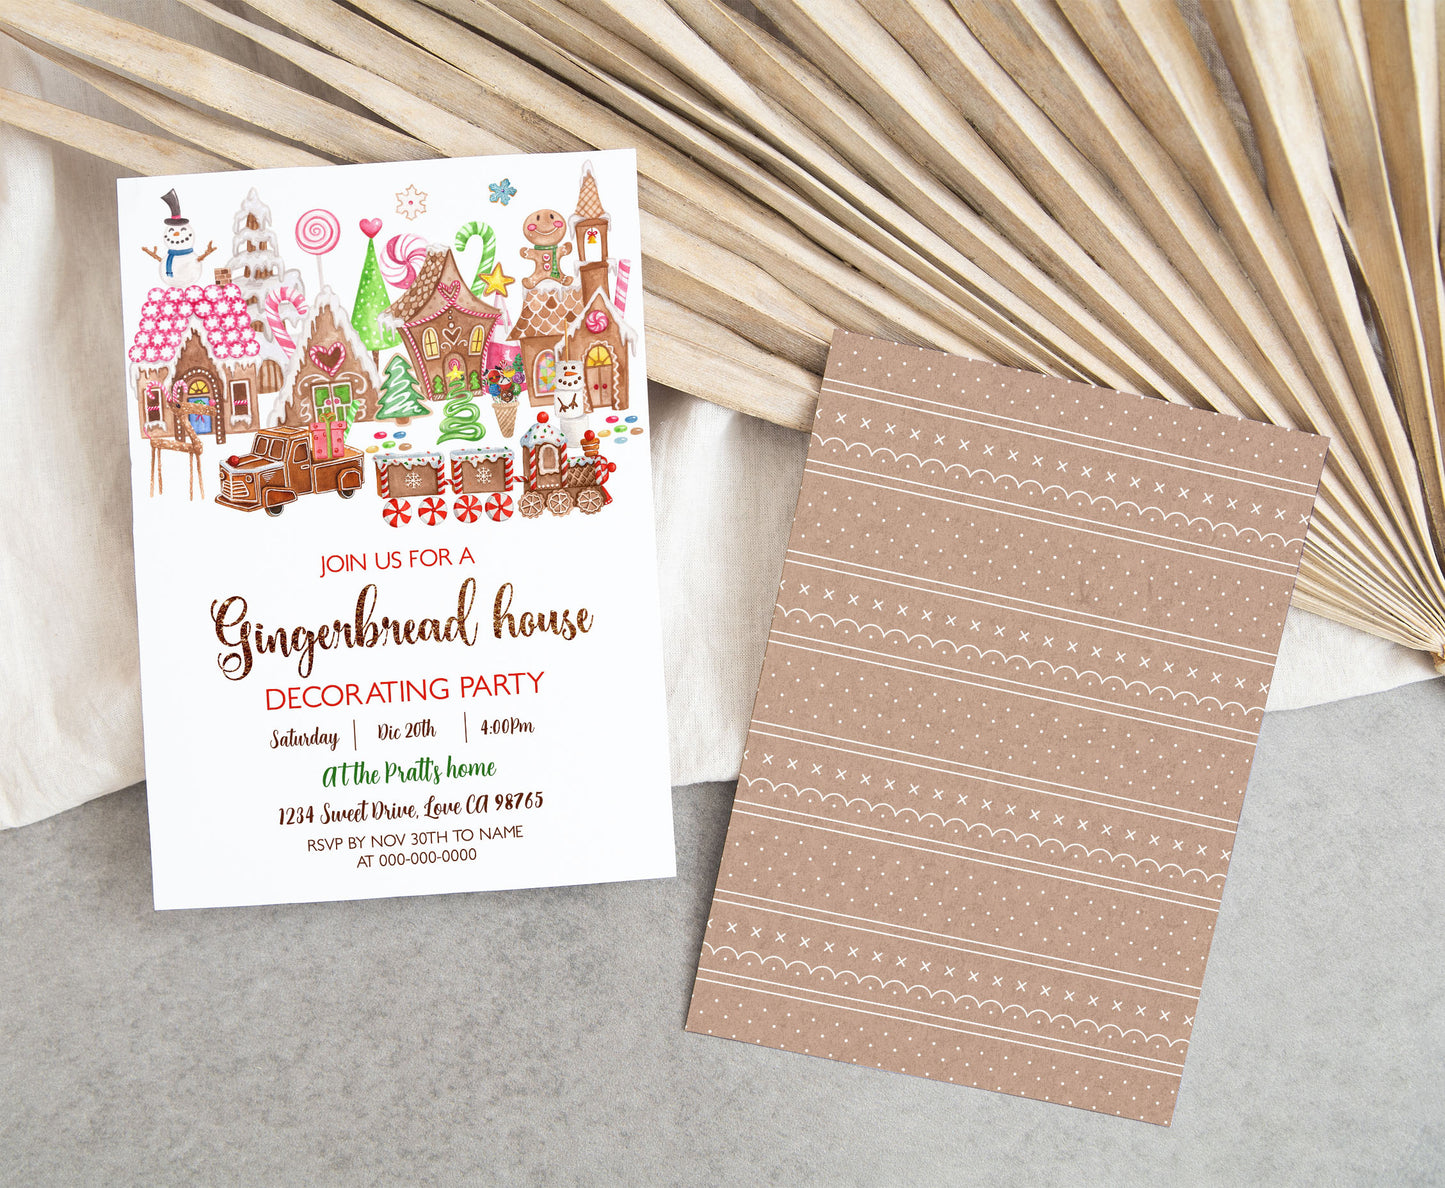 Gingerbread house decorating party invitation | Editable Christmas cookie party invite - 112F